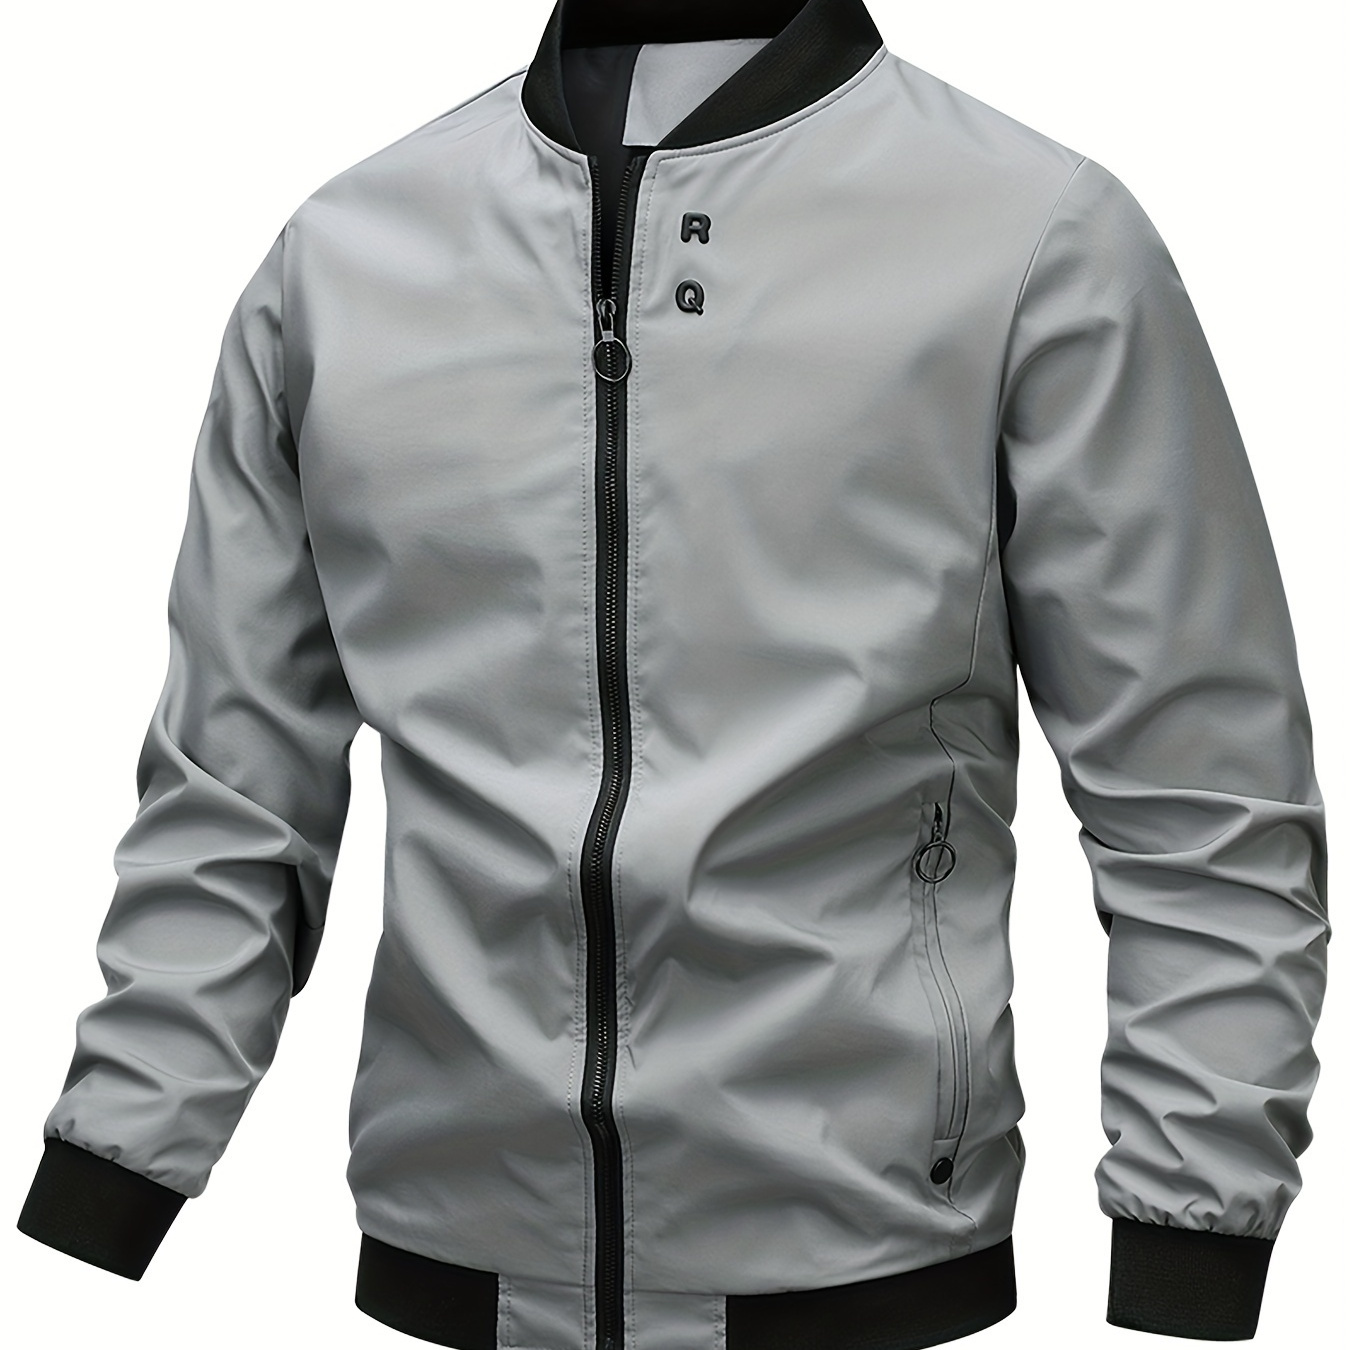 

Men's Contrast Color Long Sleeve Zipper Down Stand Collar Sports Jacket With Pockets, Chic And Trendy Windbreaker Jacket For Spring And Autumn Sports Wear And Outdoors Activities